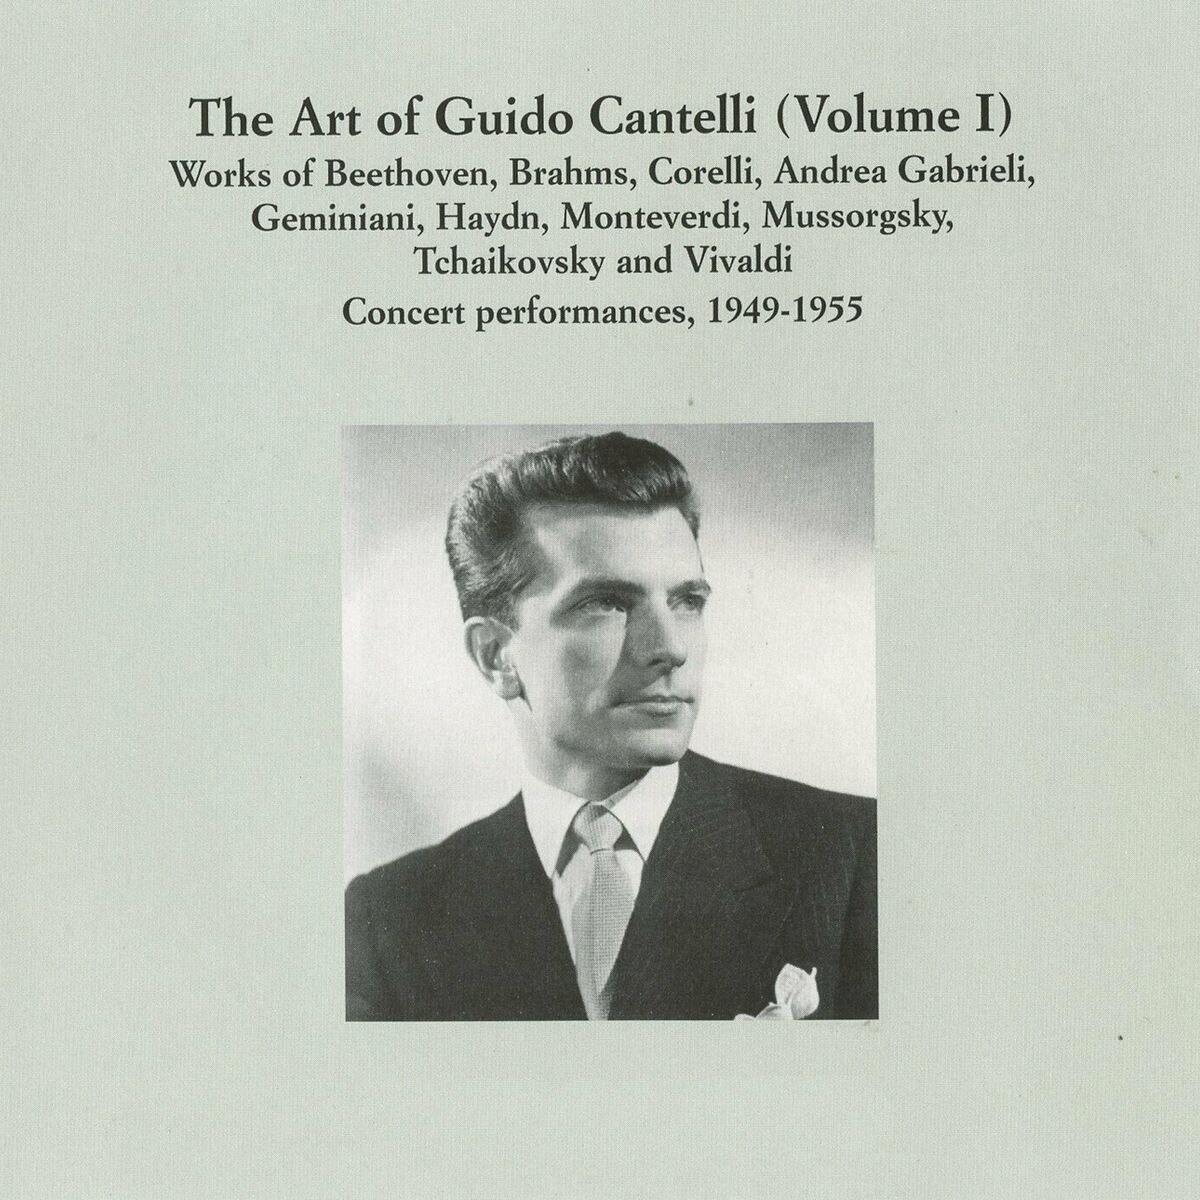 Guido Cantelli: albums